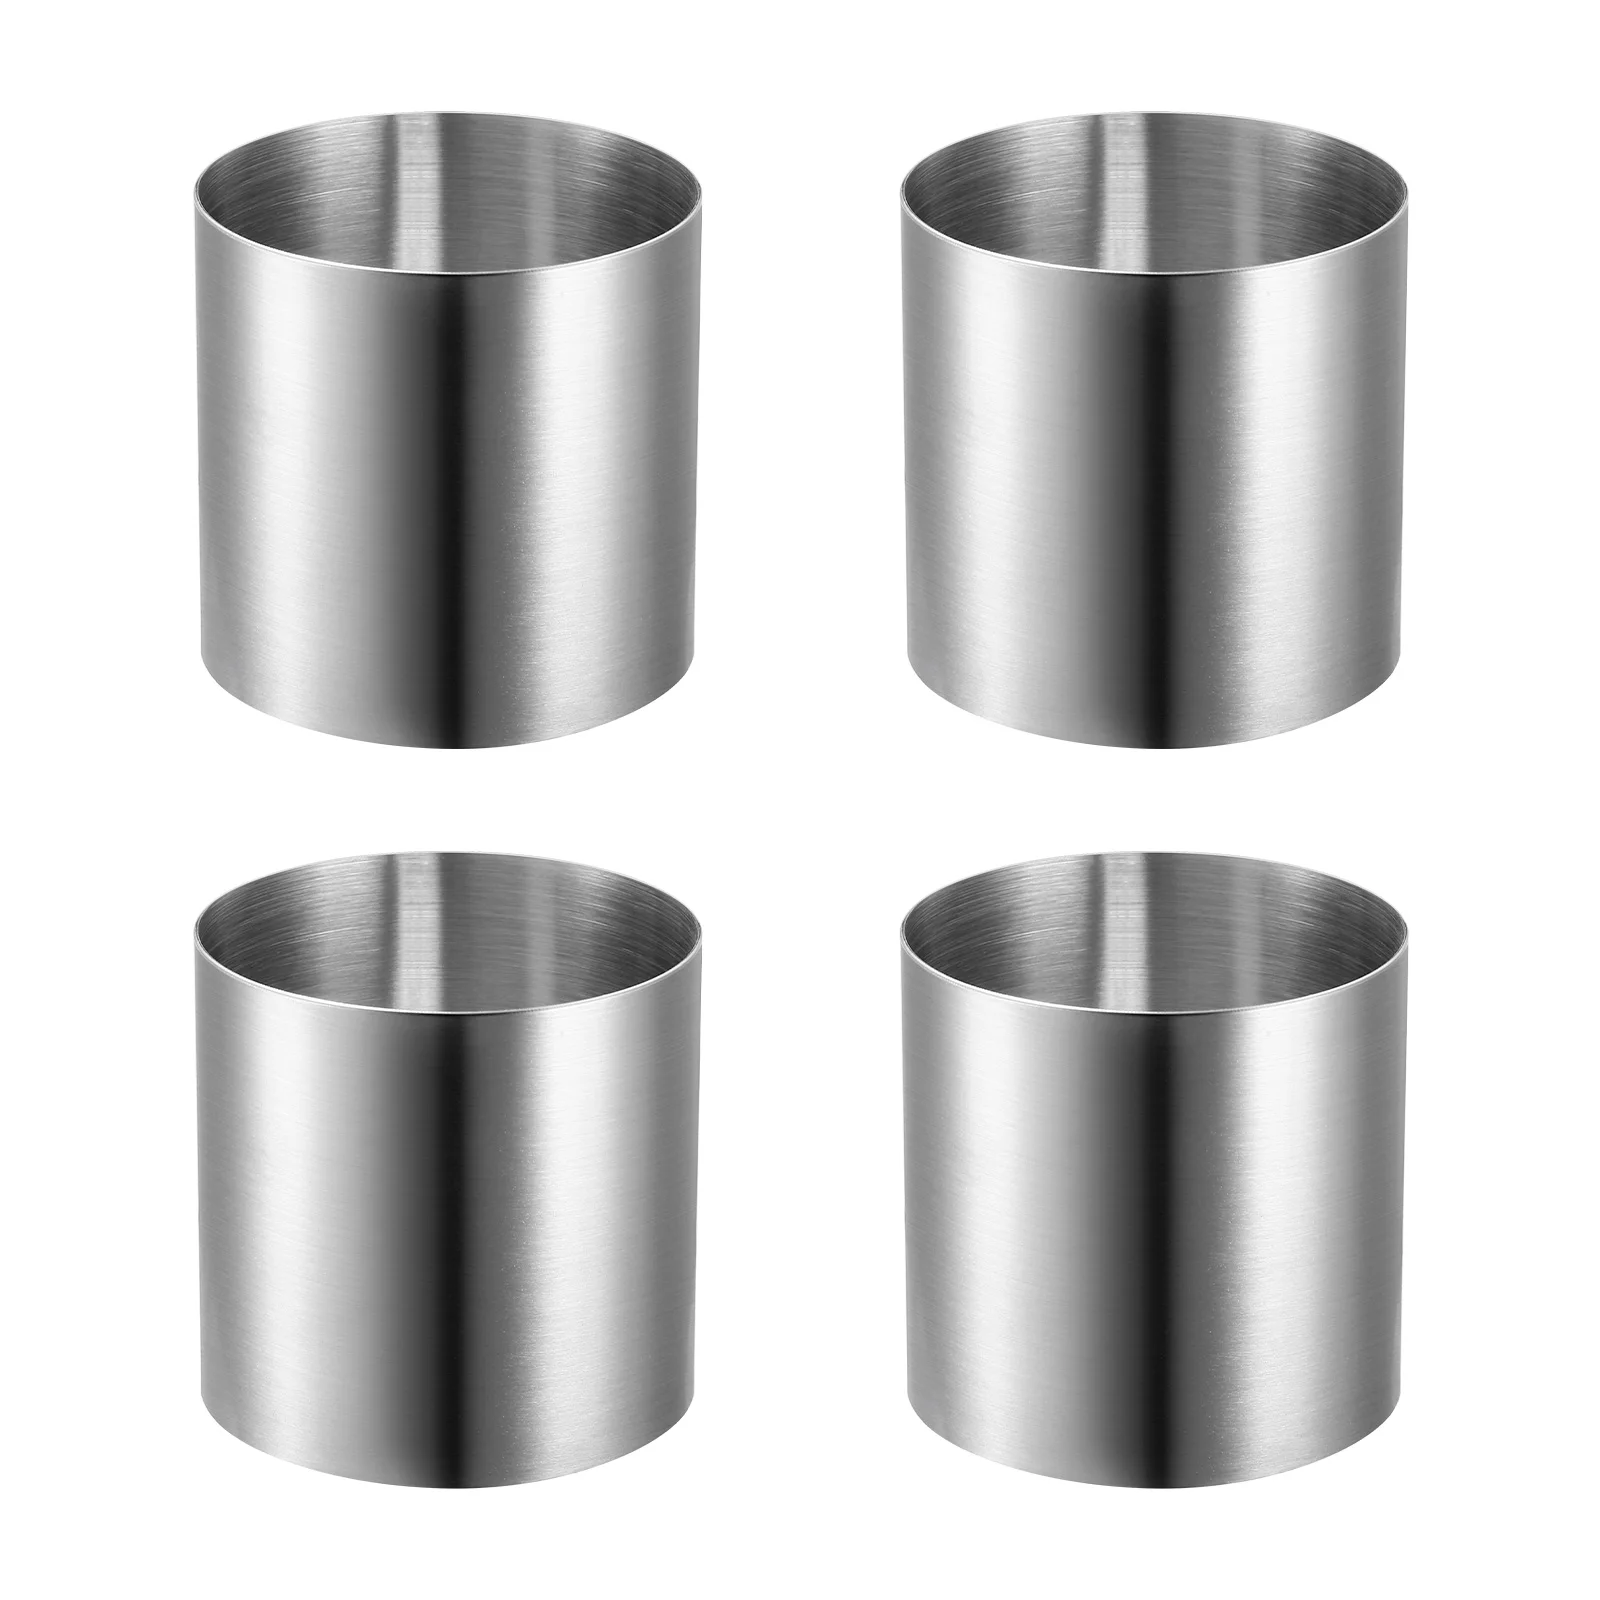 

4pcs Ring Molds Cookie Cutters Round Food Baking Molds Stainless Steel Muffin Rings Mousse Molds